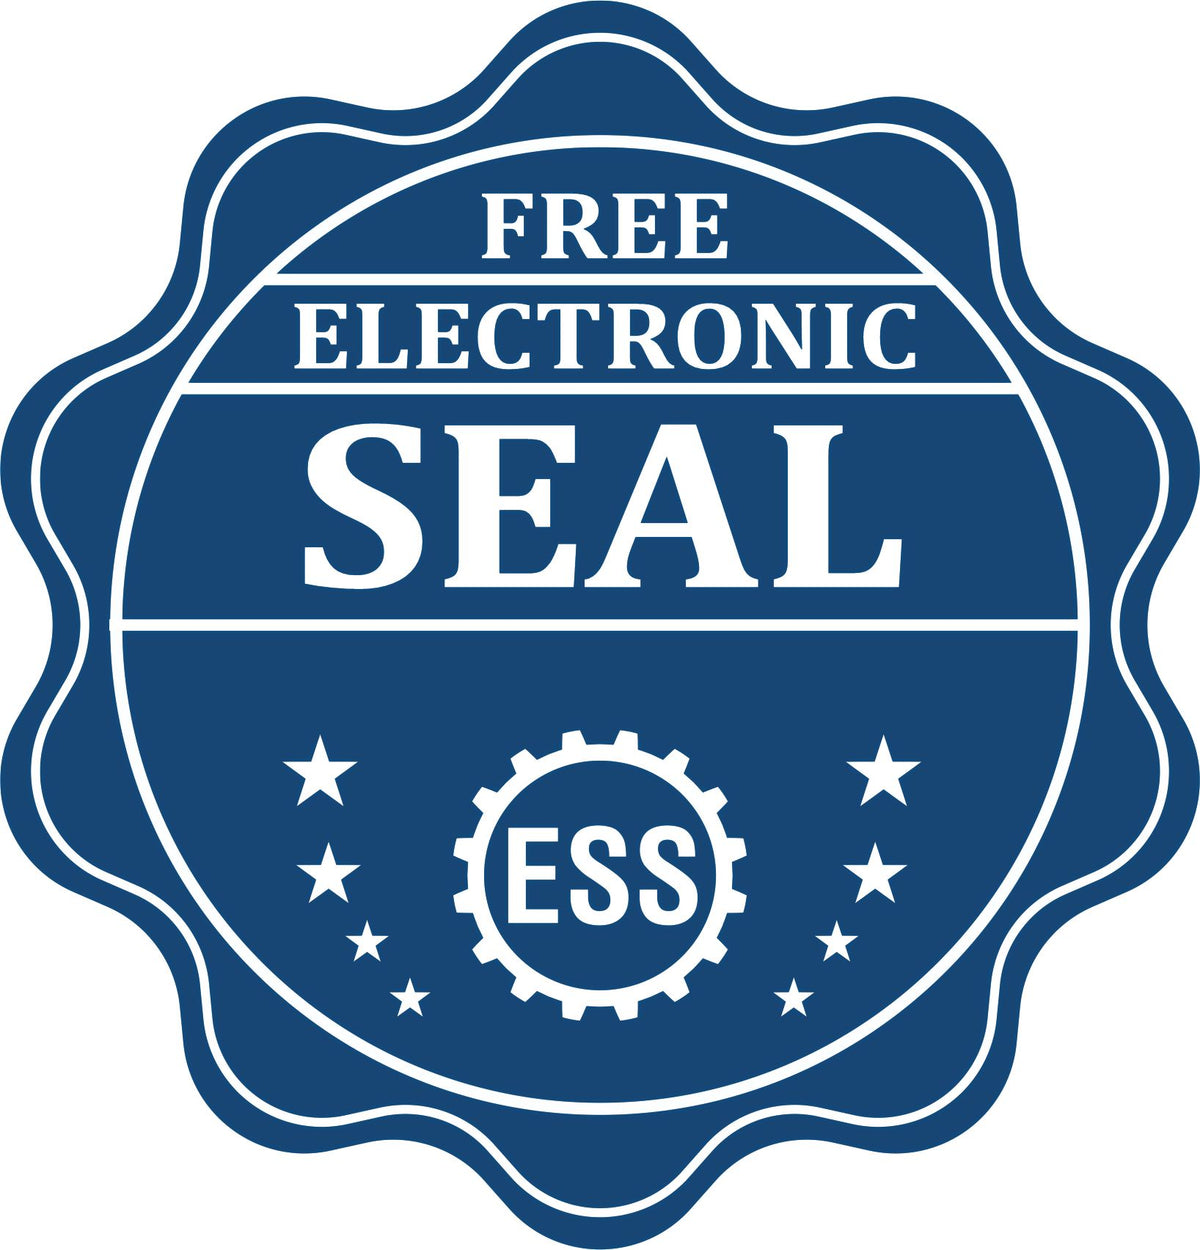 A badge showing a free electronic seal for the Heavy Duty Cast Iron California Engineer Seal Embosser with stars and the ESS gear on the emblem.